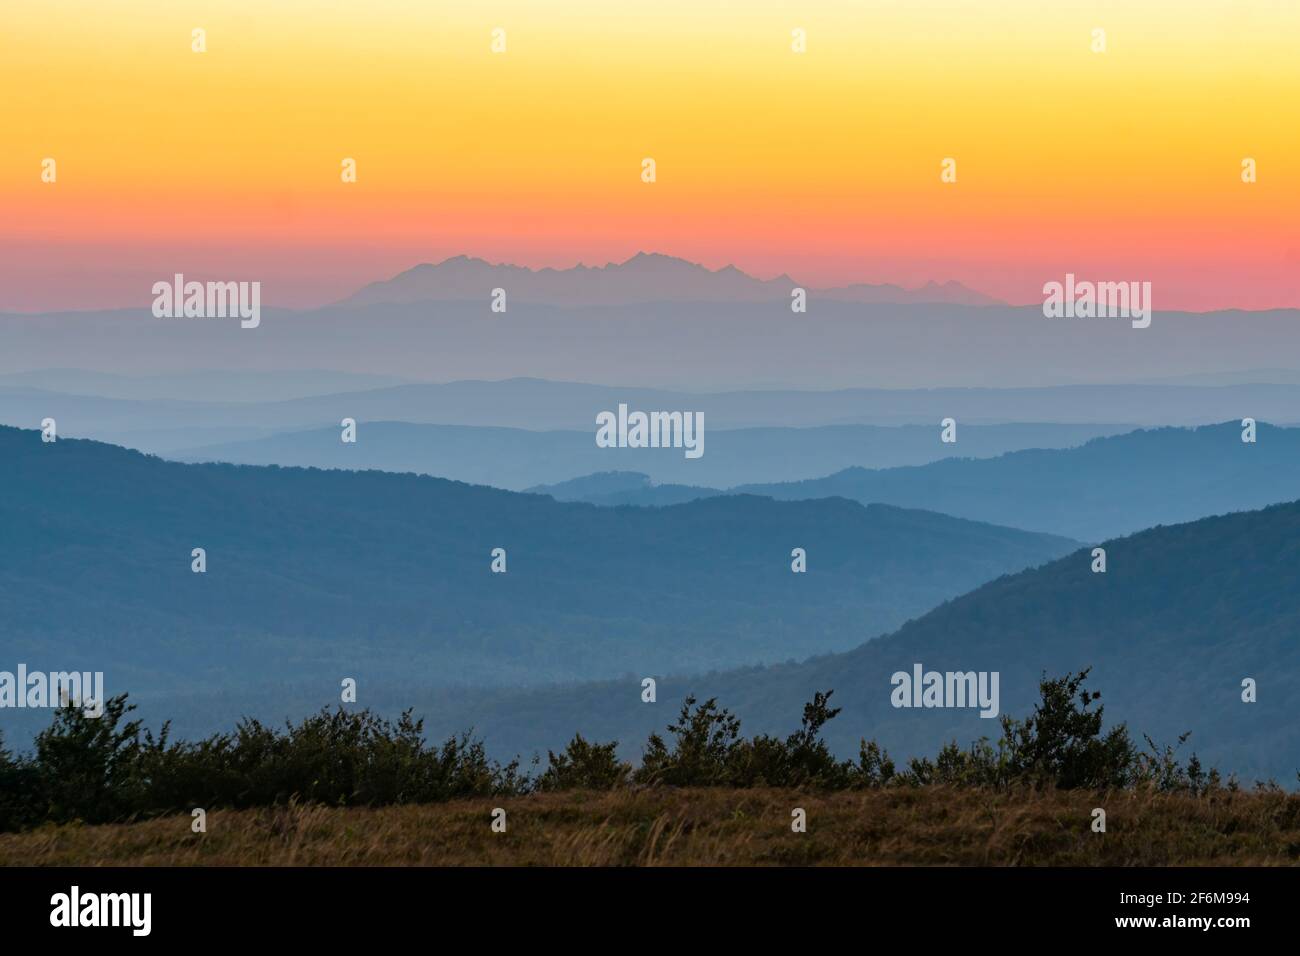 View of the sunset over the Tatra Mountains from the Jaslo peak in the Bieszczady Mountains. Poland, Europe Stock Photo